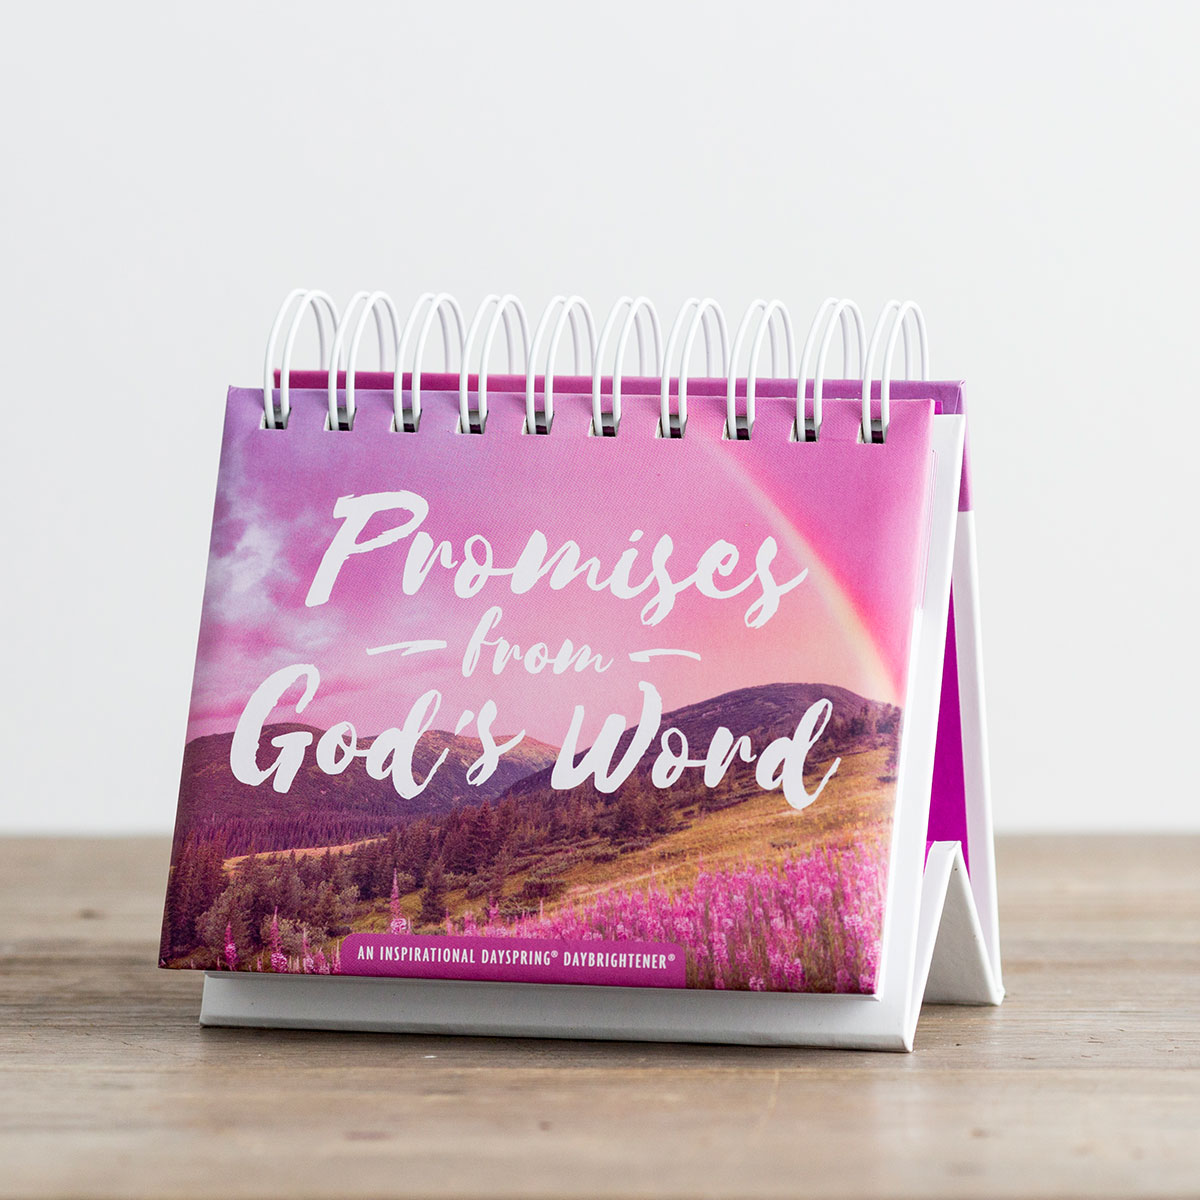 Daybrighteners-Promises from God's Word